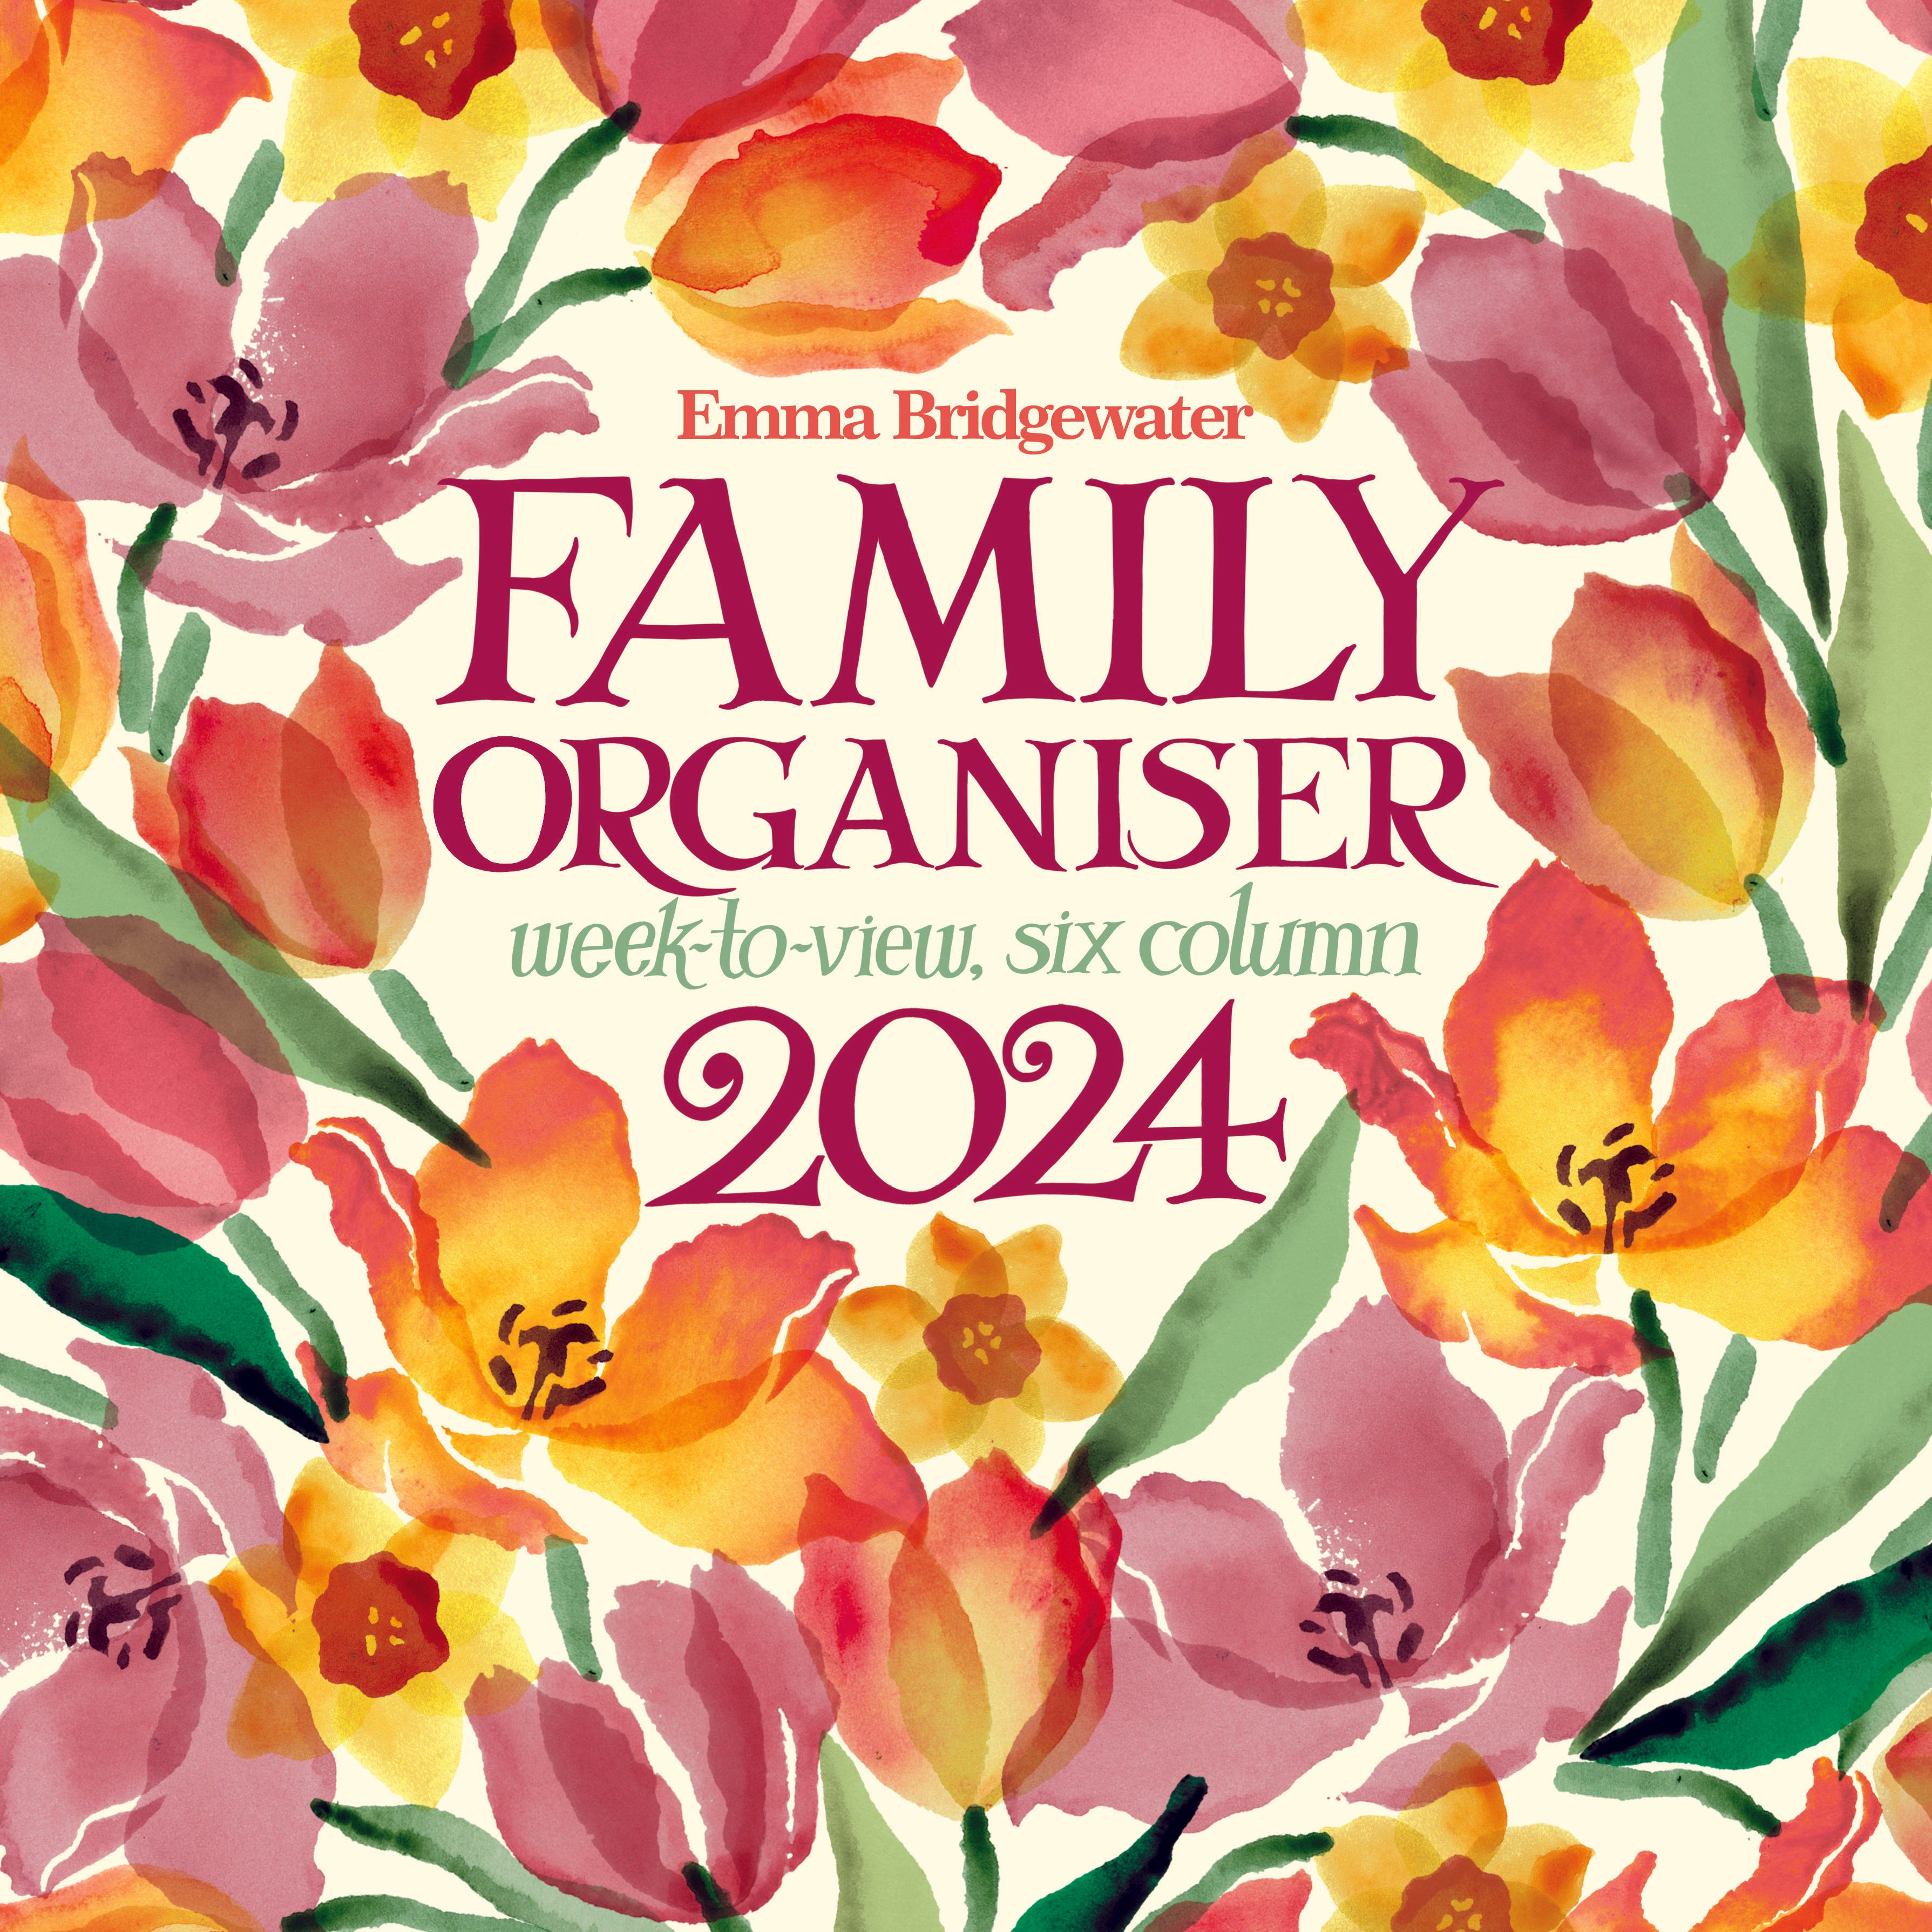 The Emma Bridgewater Family Organiser cover featuring an array of colourful flowers.